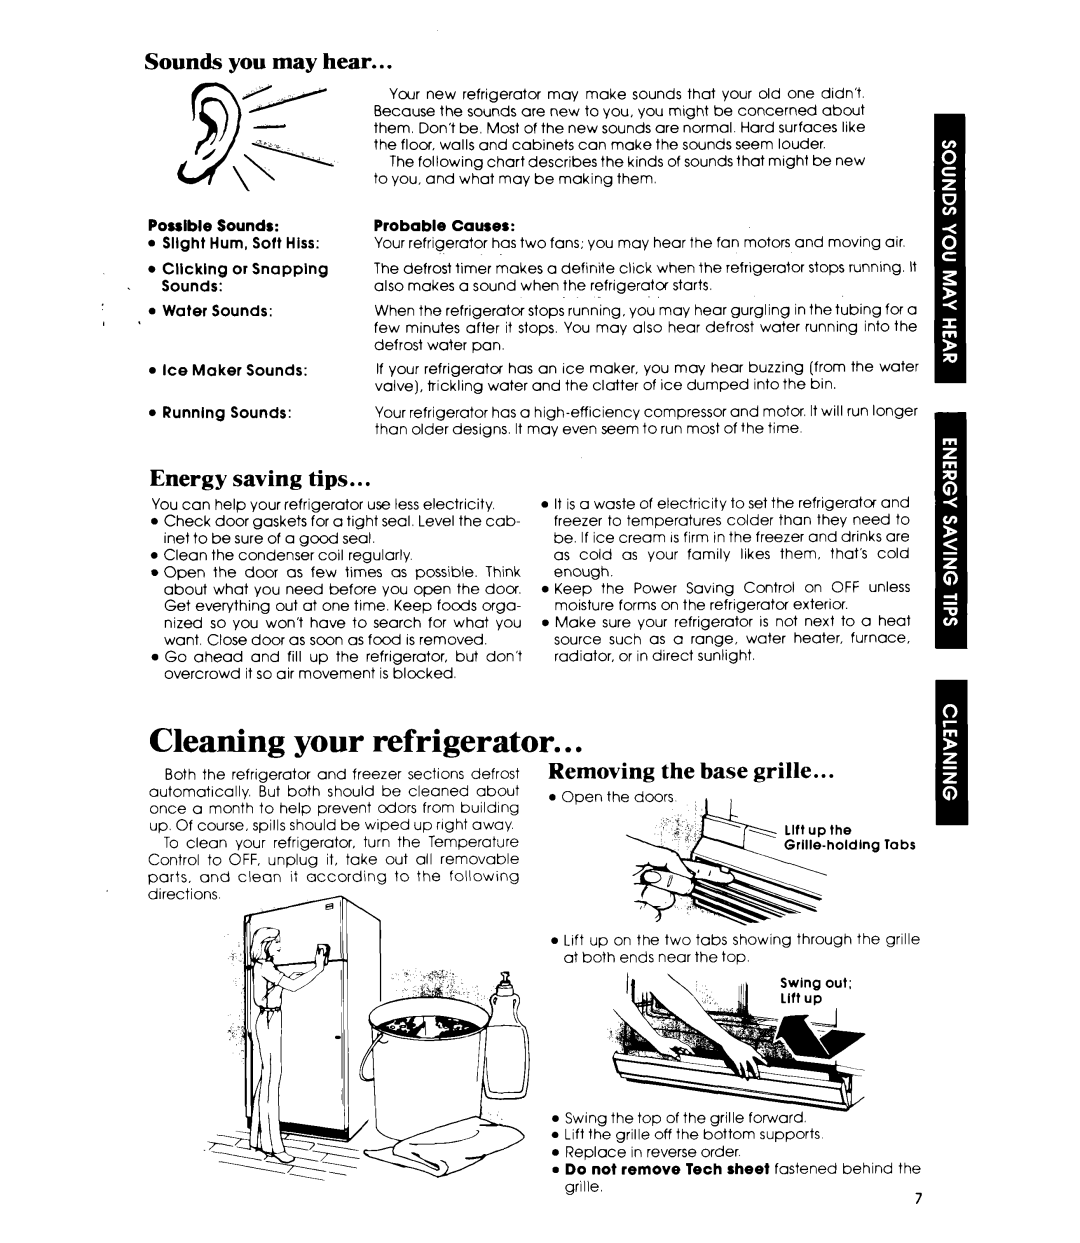 Whirlpool ET19JKXL manual Cleaning your refrigerator, Sounds you may hear, Energy saving tips, Removing the base grille 